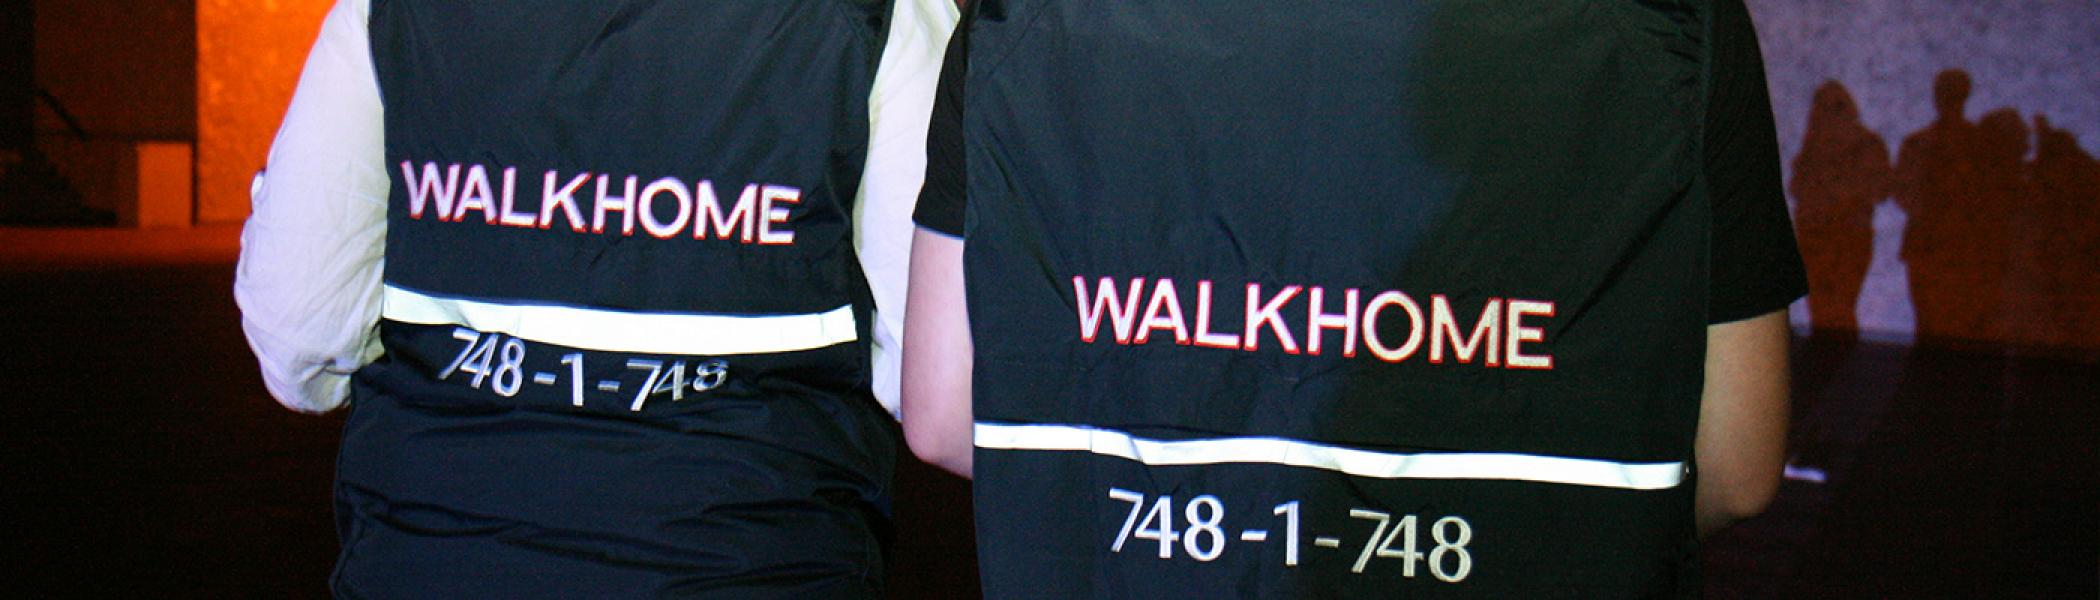 2 people wearing a vest that says "WALKHOME" at the back